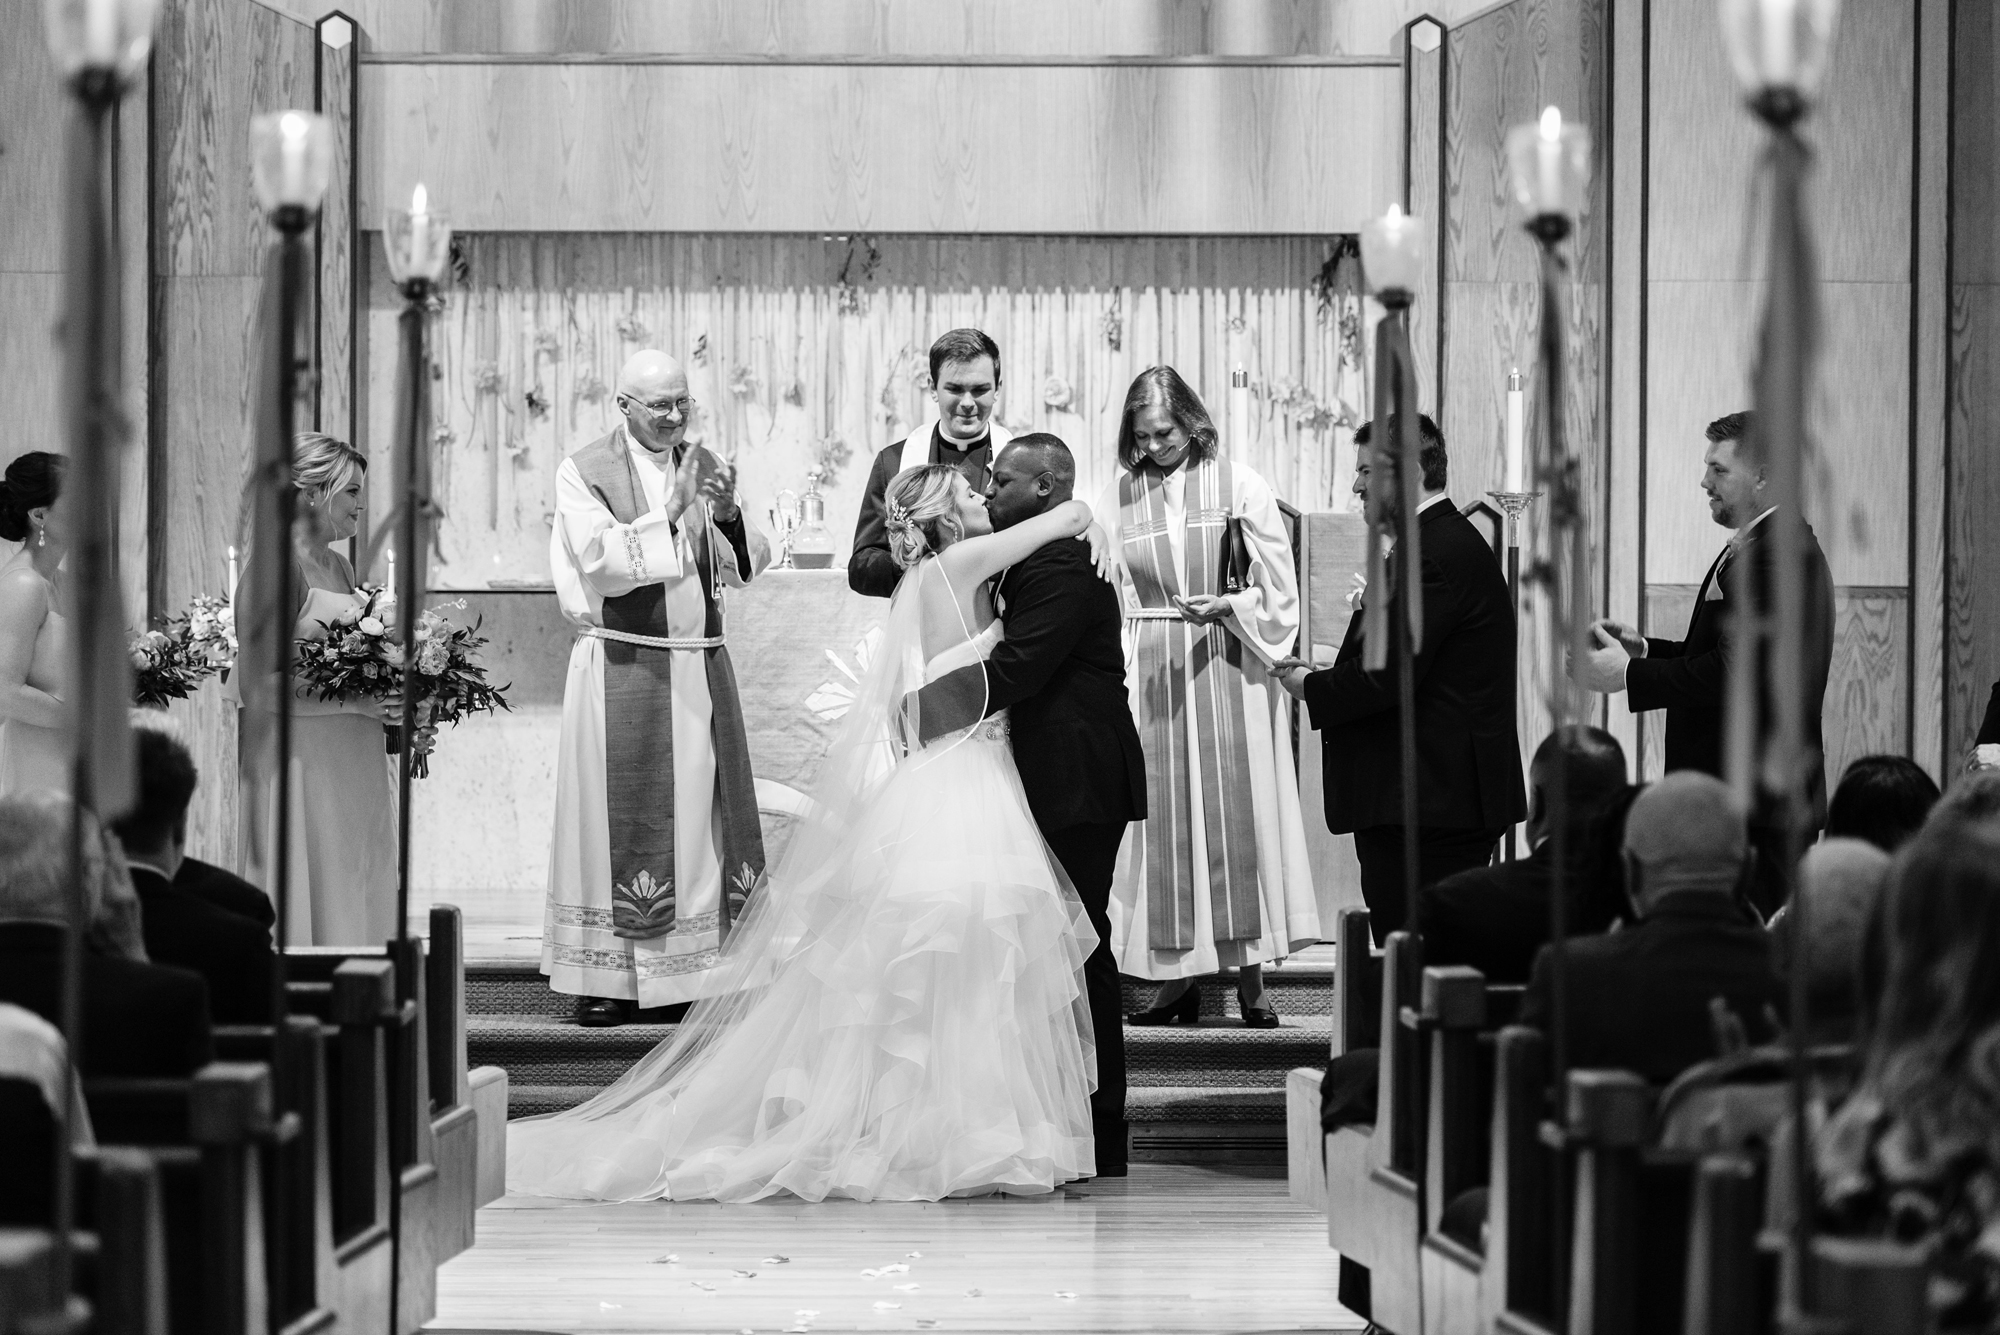 Wedding ceremony at Christ the King Lutheran Church